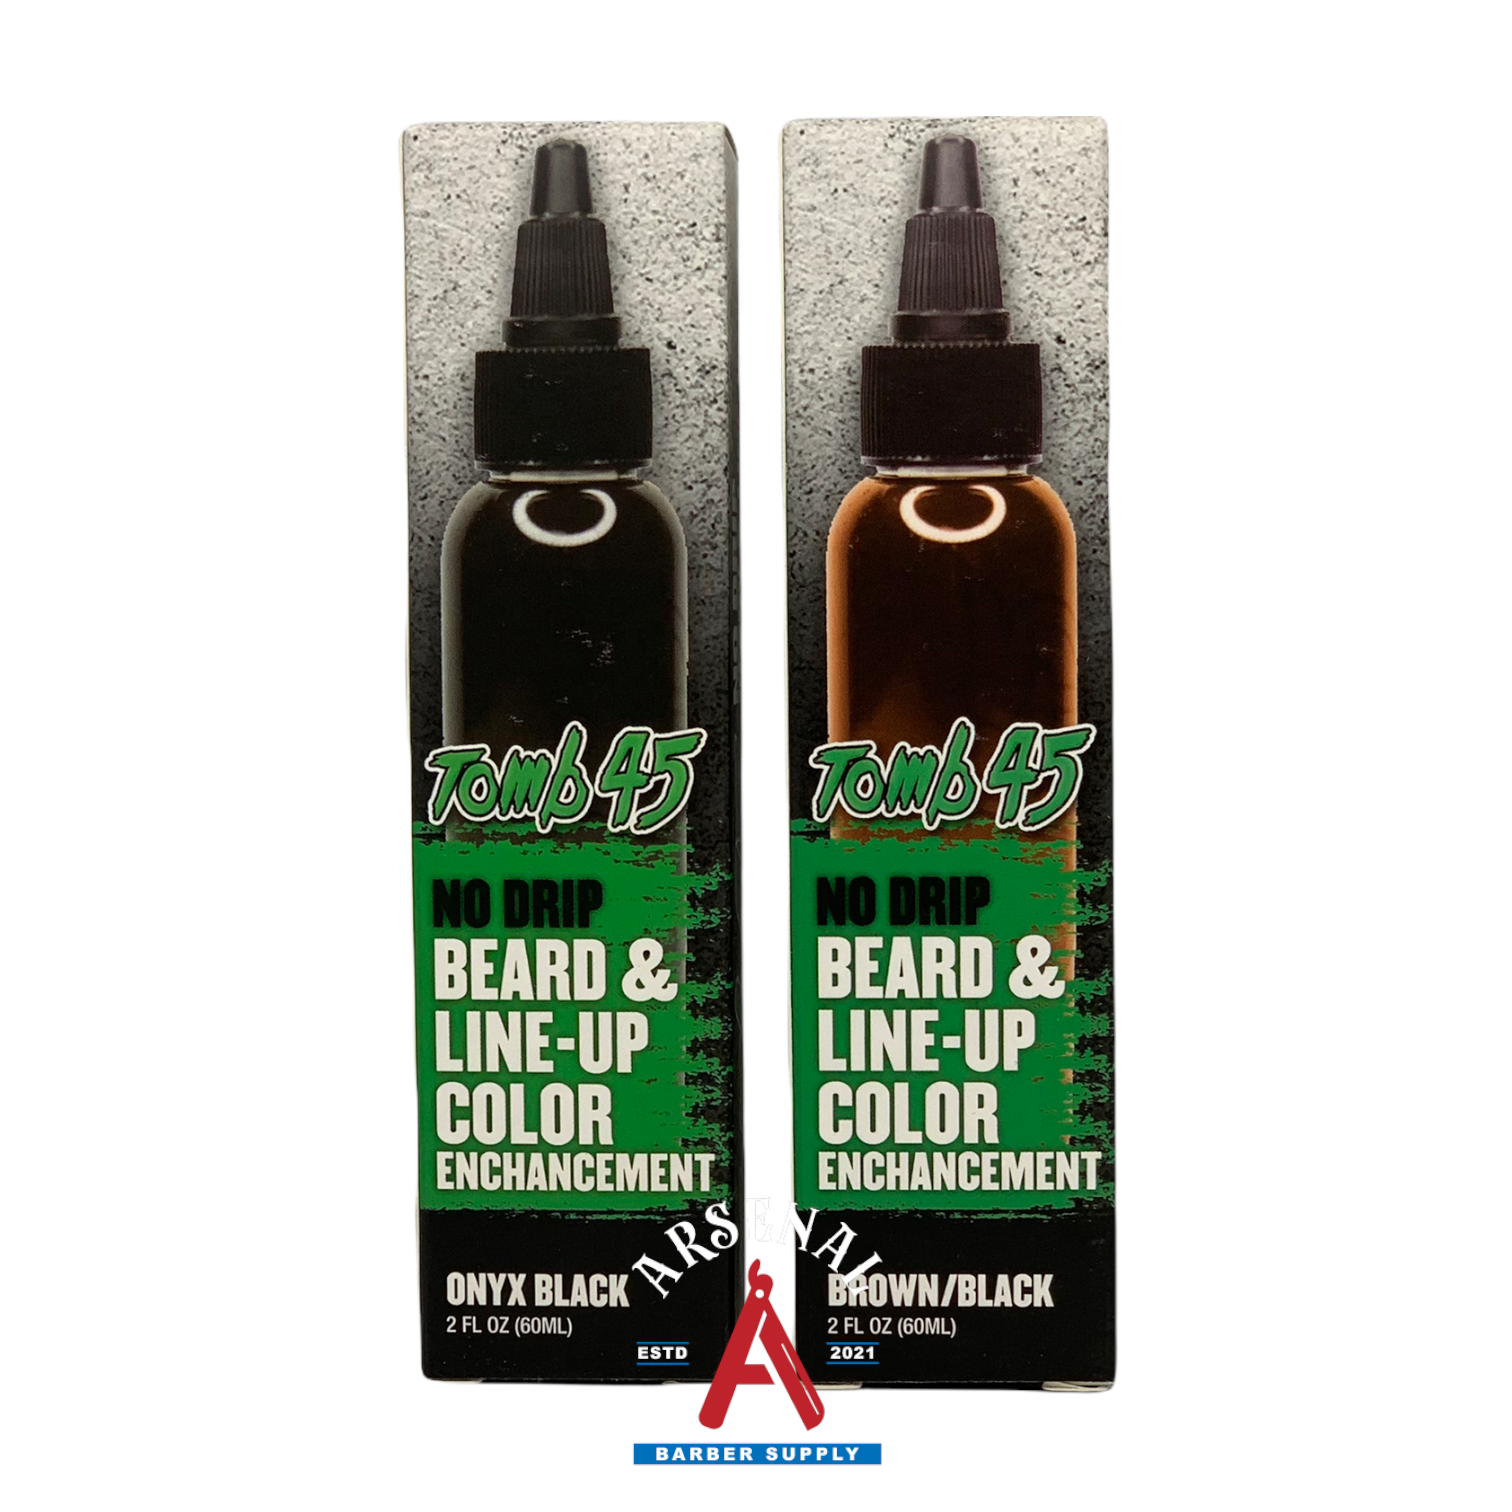 TOMB45 BEARD & LINE UP COLOR ENHANCEMENT – Arsenal Barber Supply